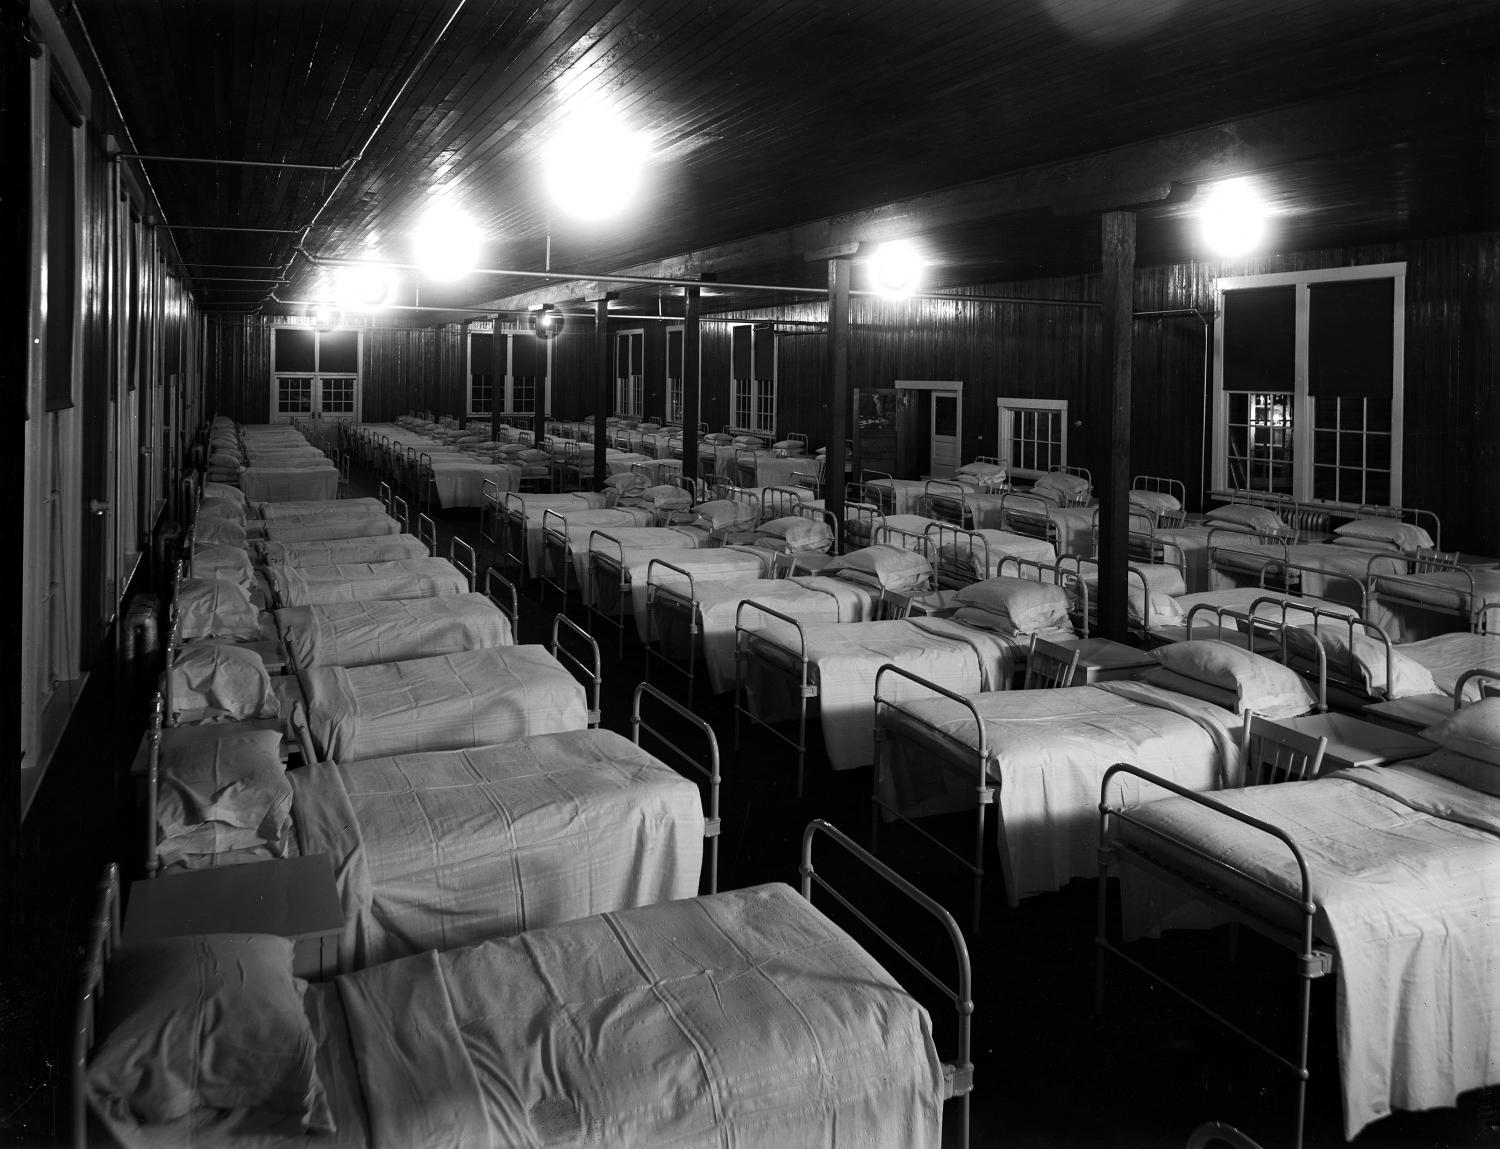 Empty beds lined up at the Vancouver General Hospital